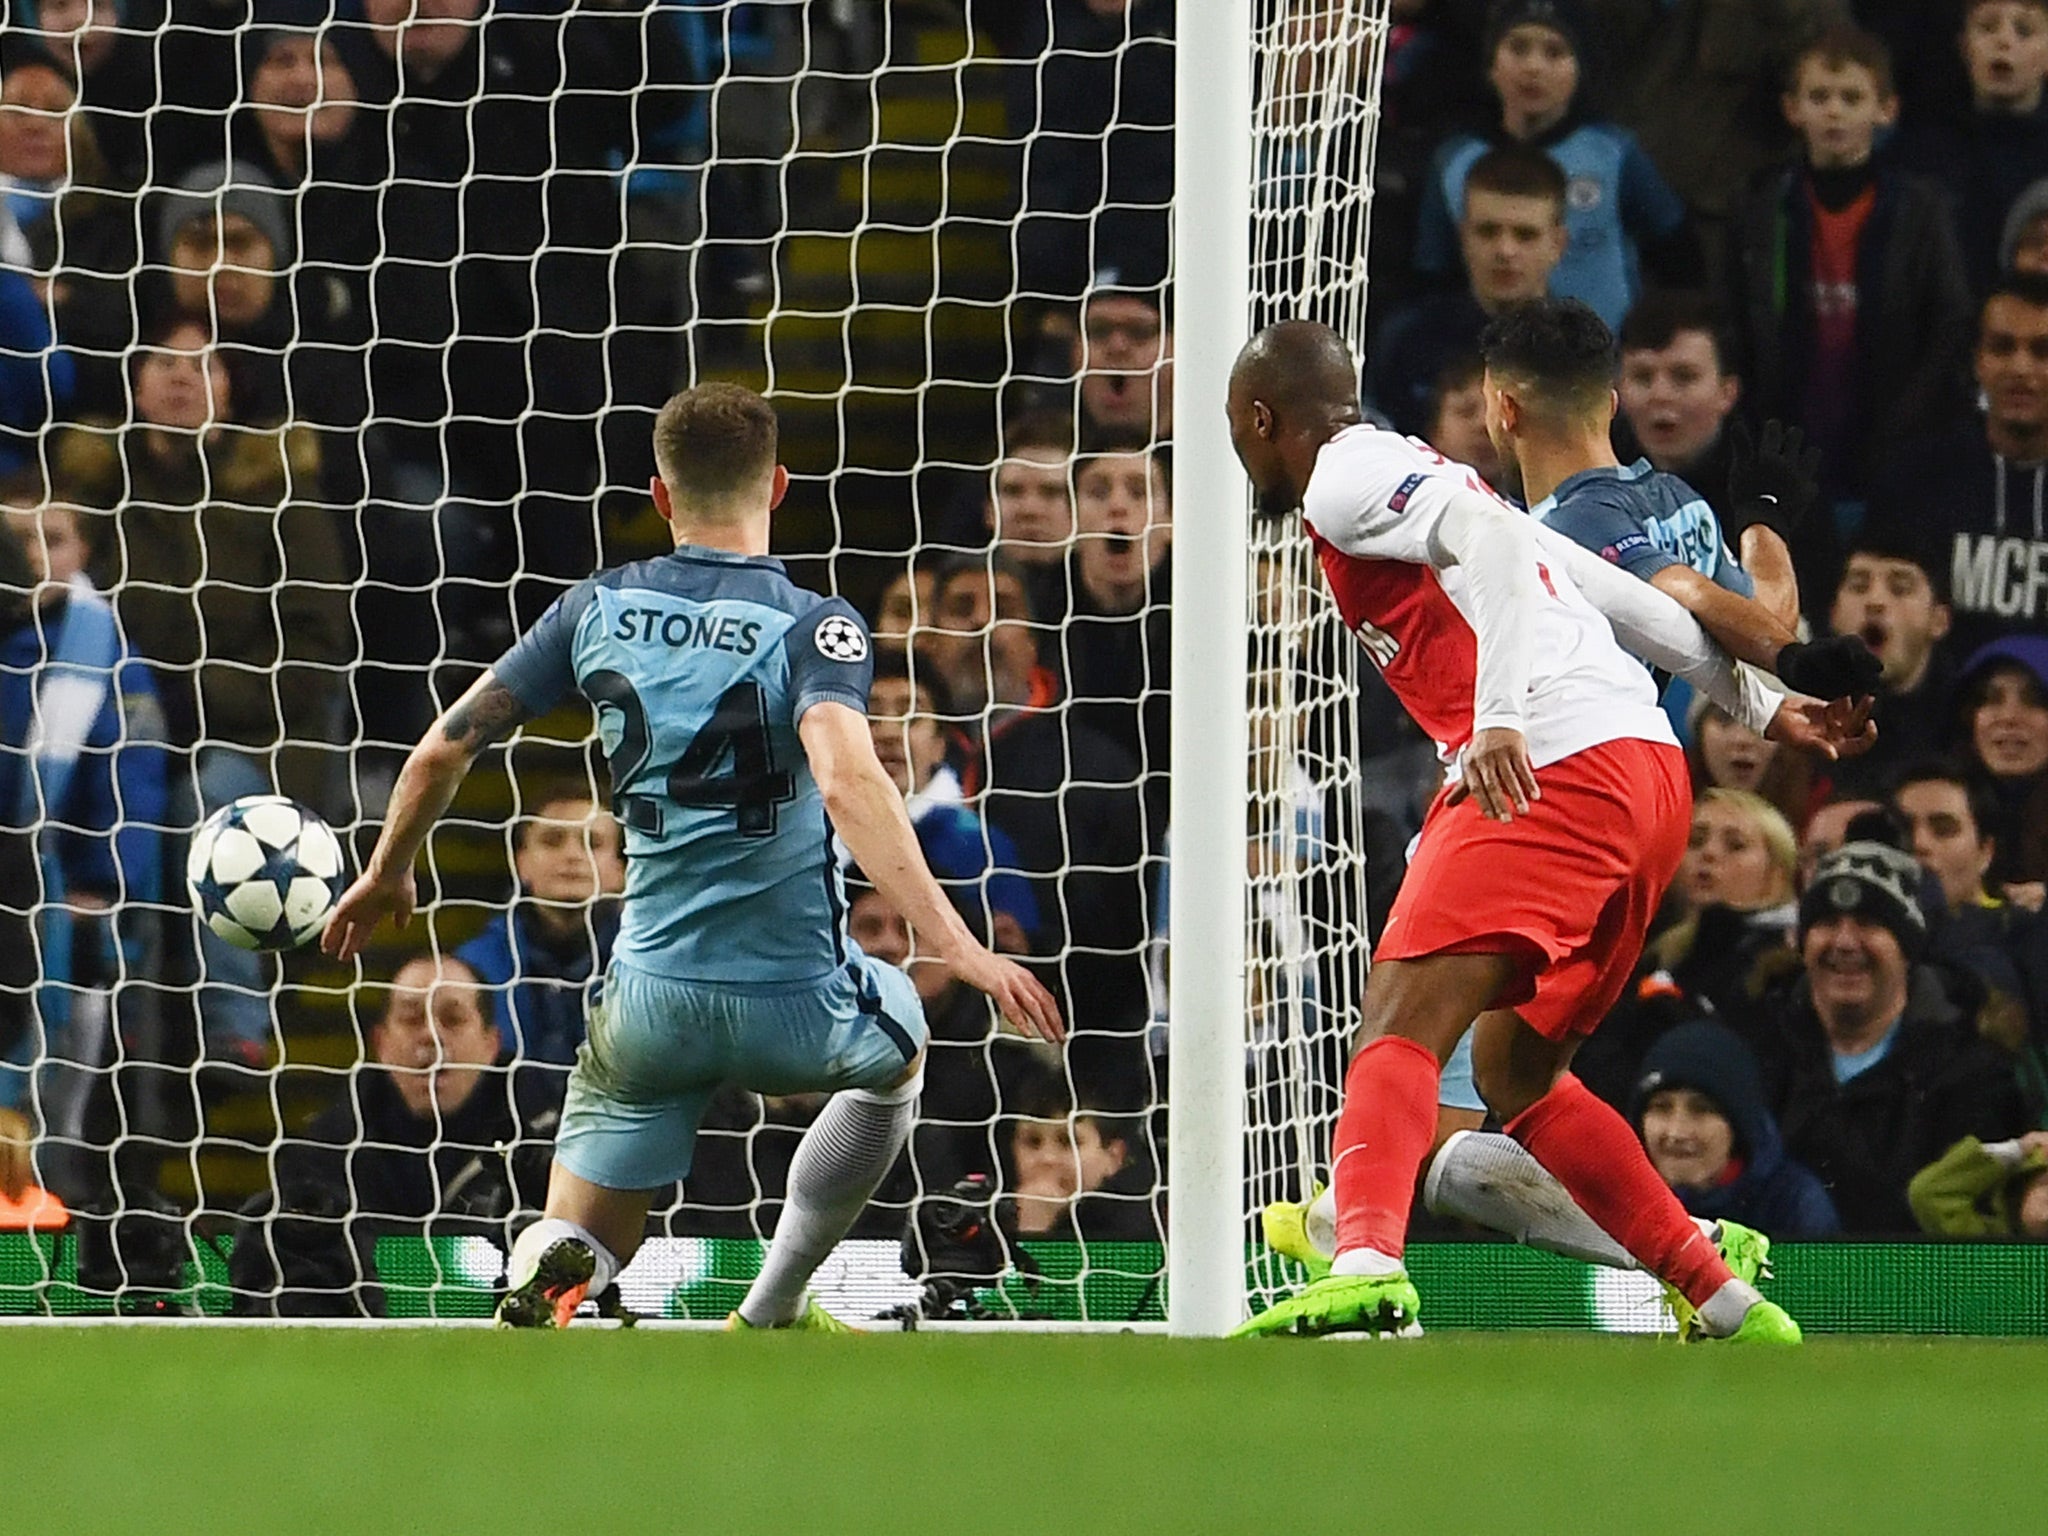 John Stones tapped in at the far post to complete City's remarkable comeback